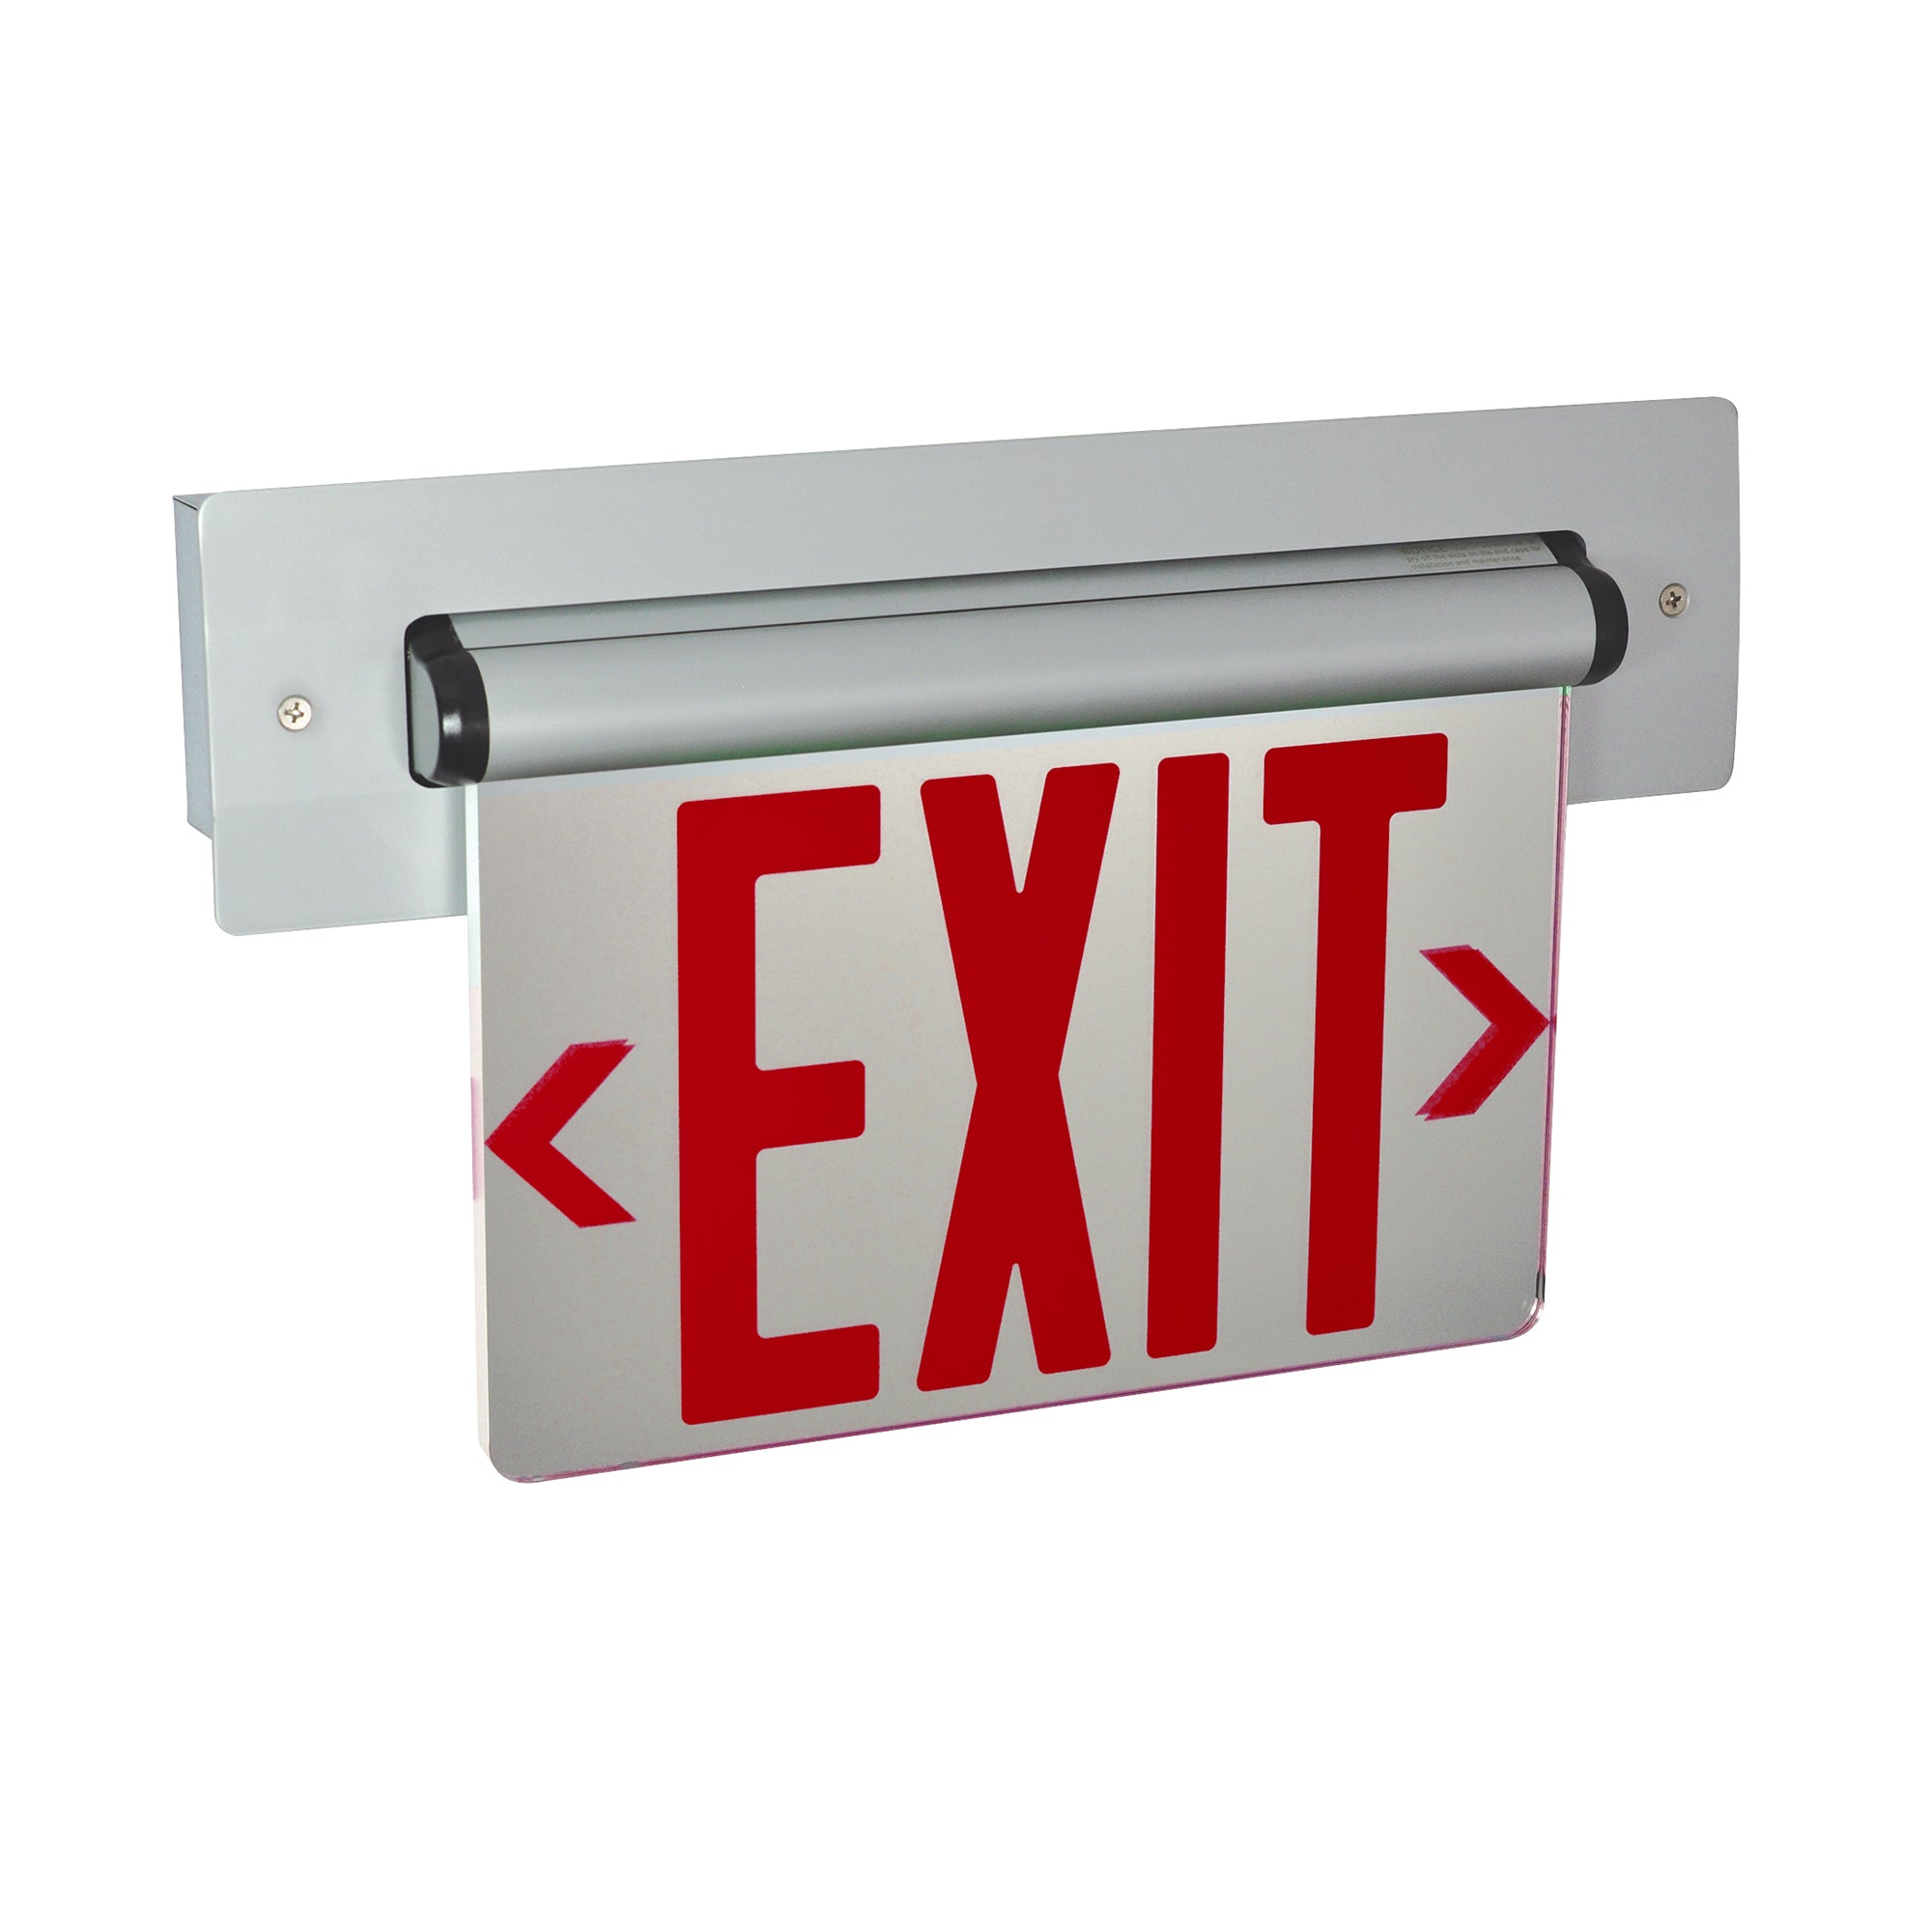 Nora Lighting NX-814-LEDRCW - Exit / Emergency - Recessed Adjustable LED Edge-Lit Exit Sign, 2 Circuit, 6 Inch Red Letters, Single Face / Clear Acrylic, White Housing